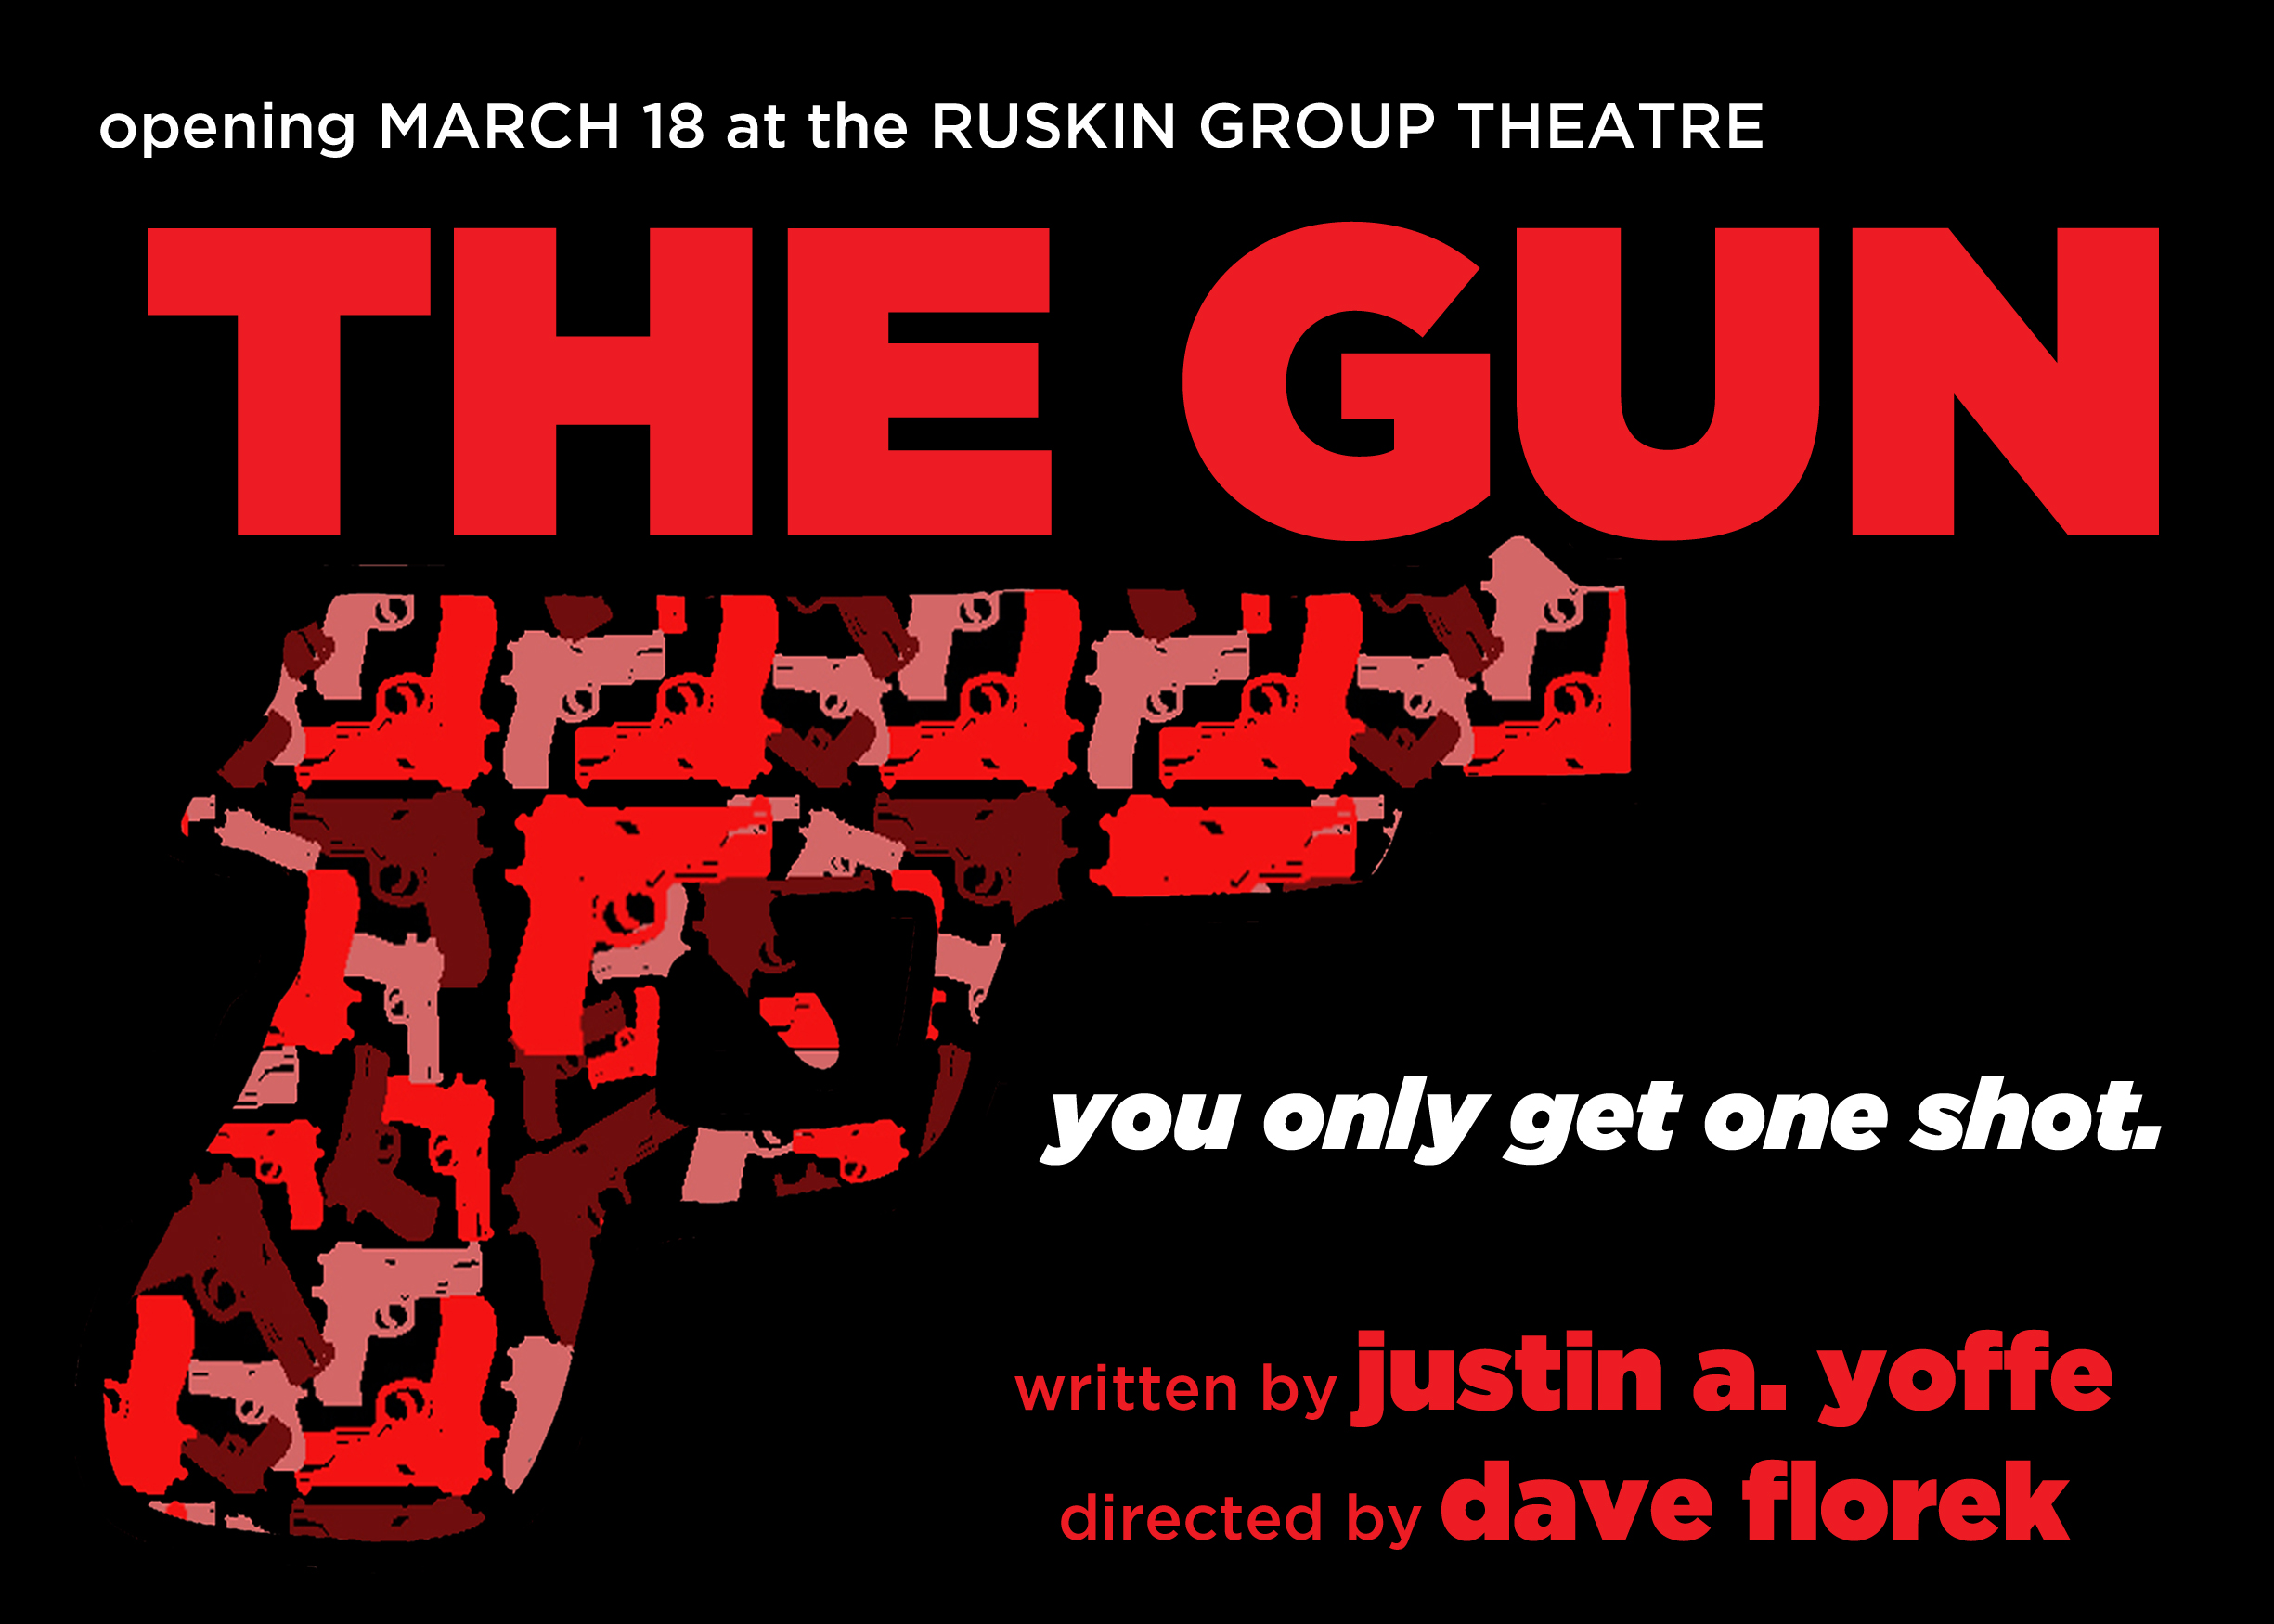 The Ruskin Theatre Group Presents: The Gun